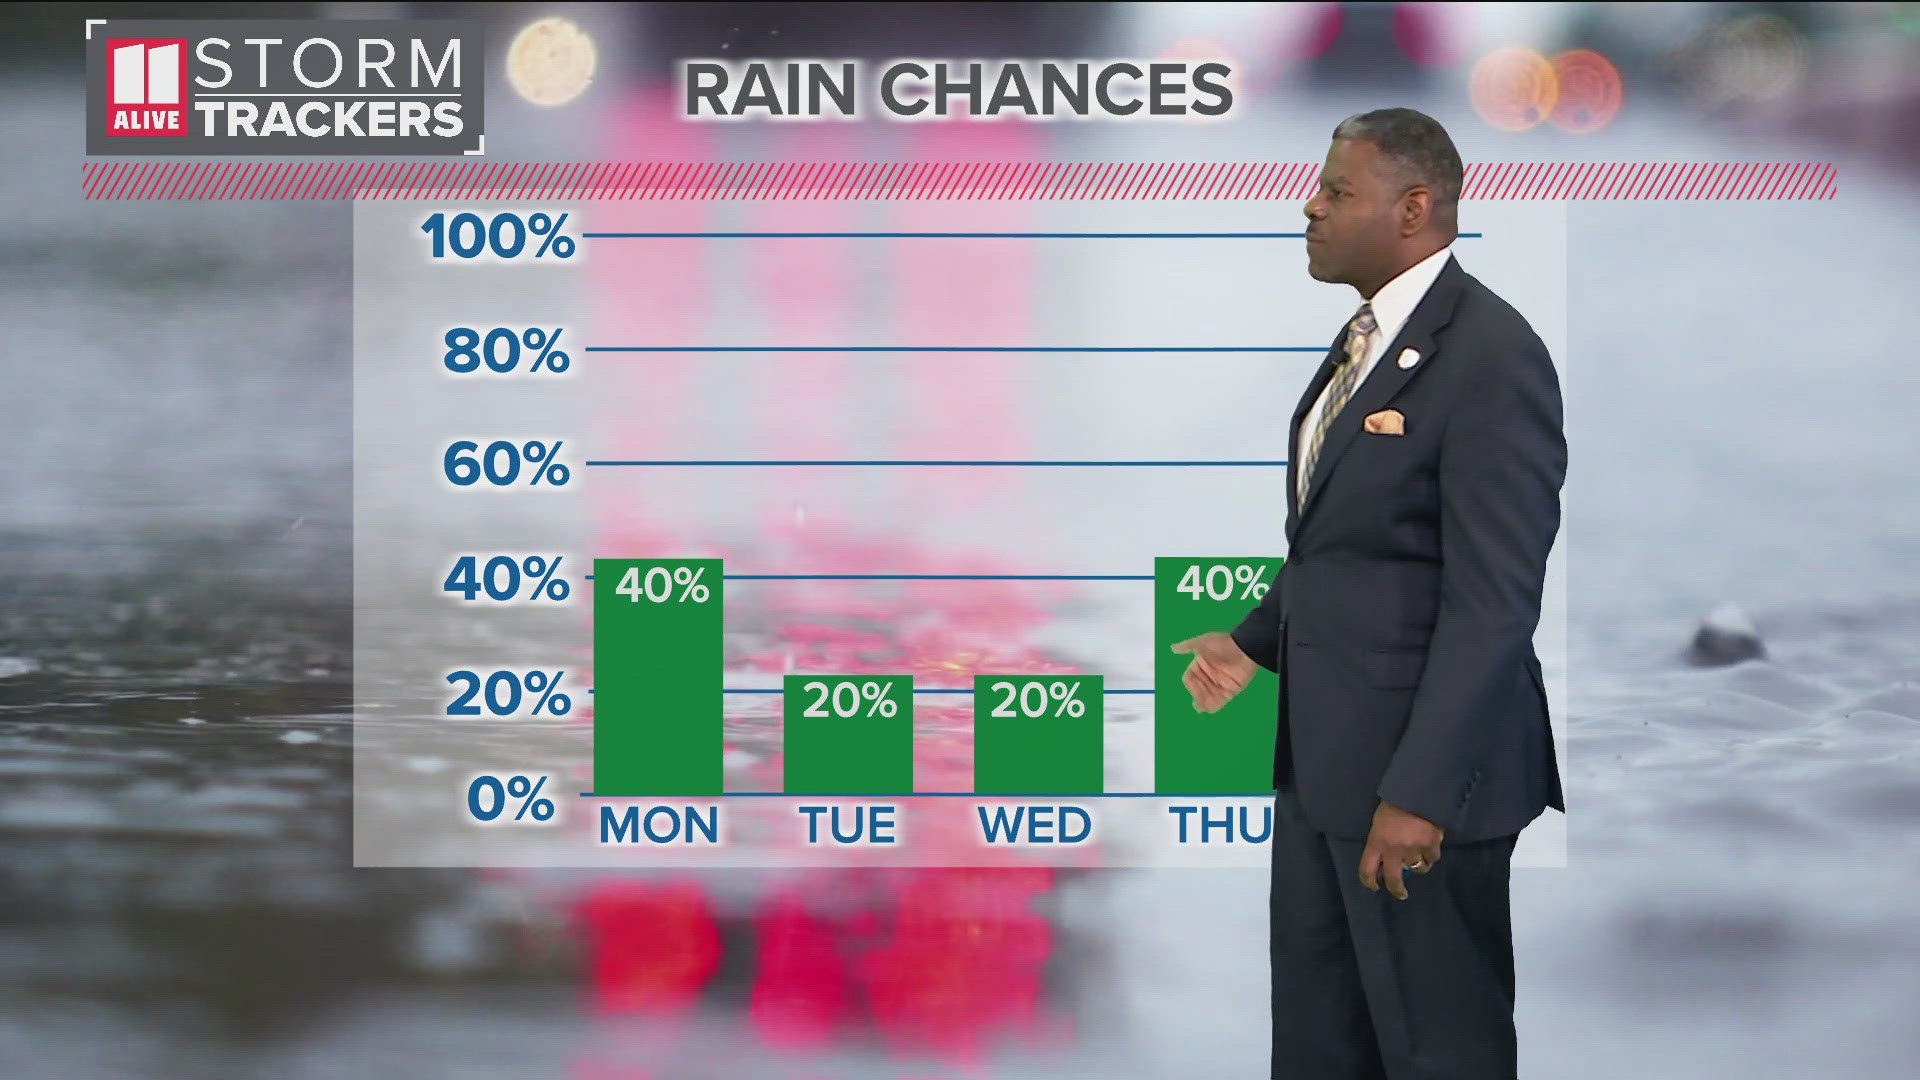 Pop-up showers and storms are possible the rest of the week